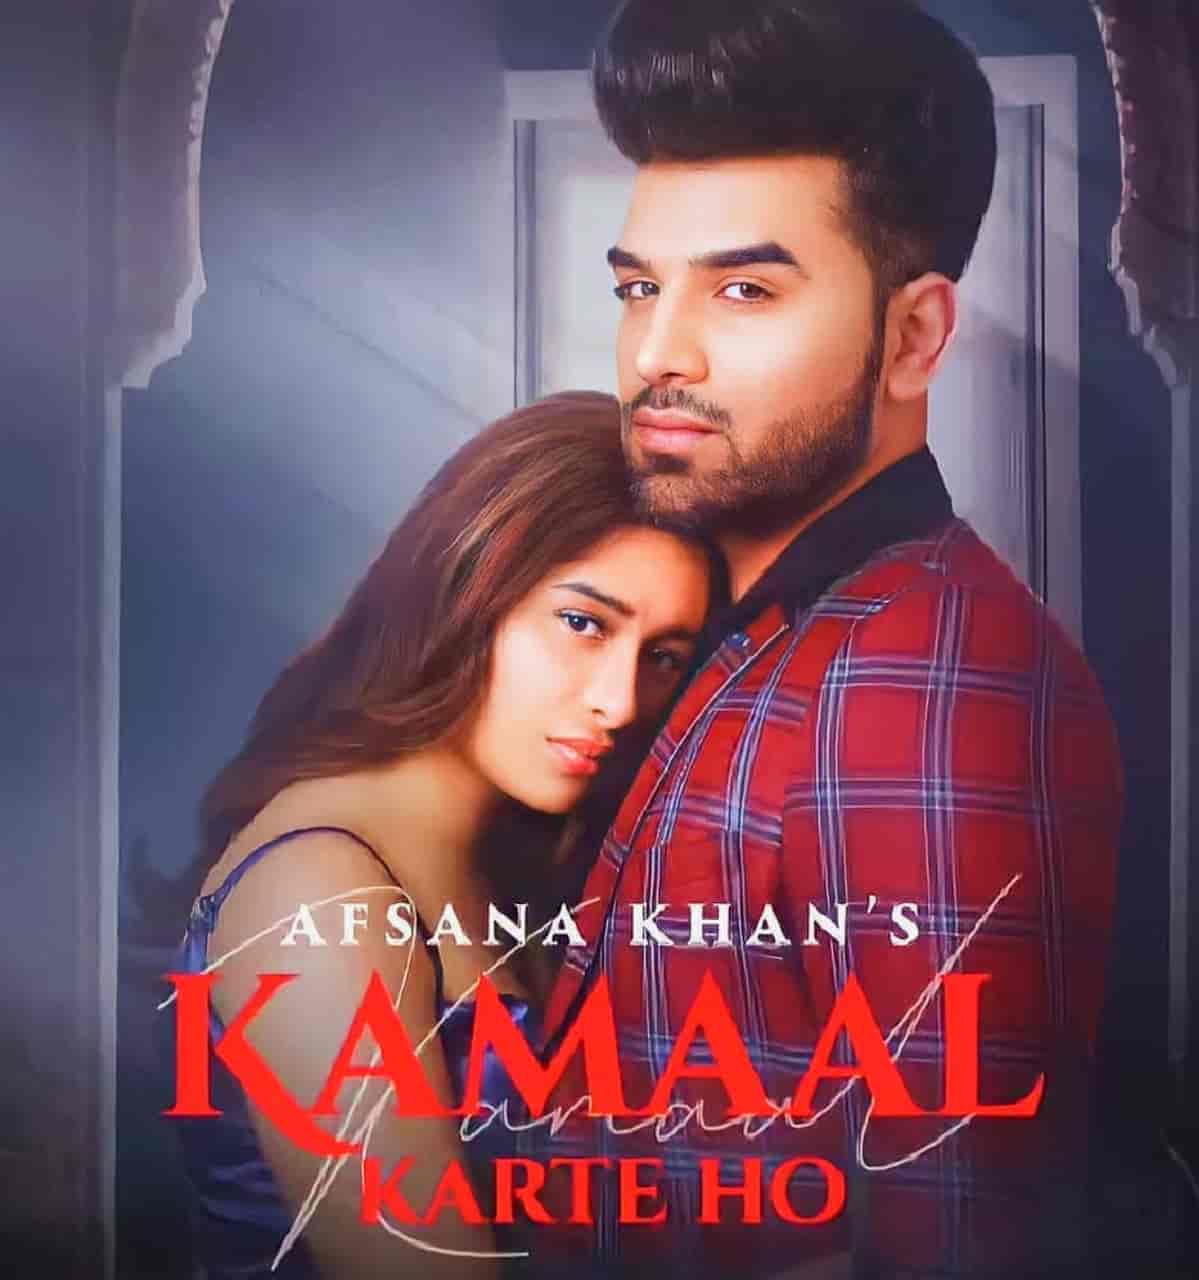 A very talented punjabi female artist Afsana Khan come back again with new sad hindi song which is titled Kamaal Karte Ho sung by her.